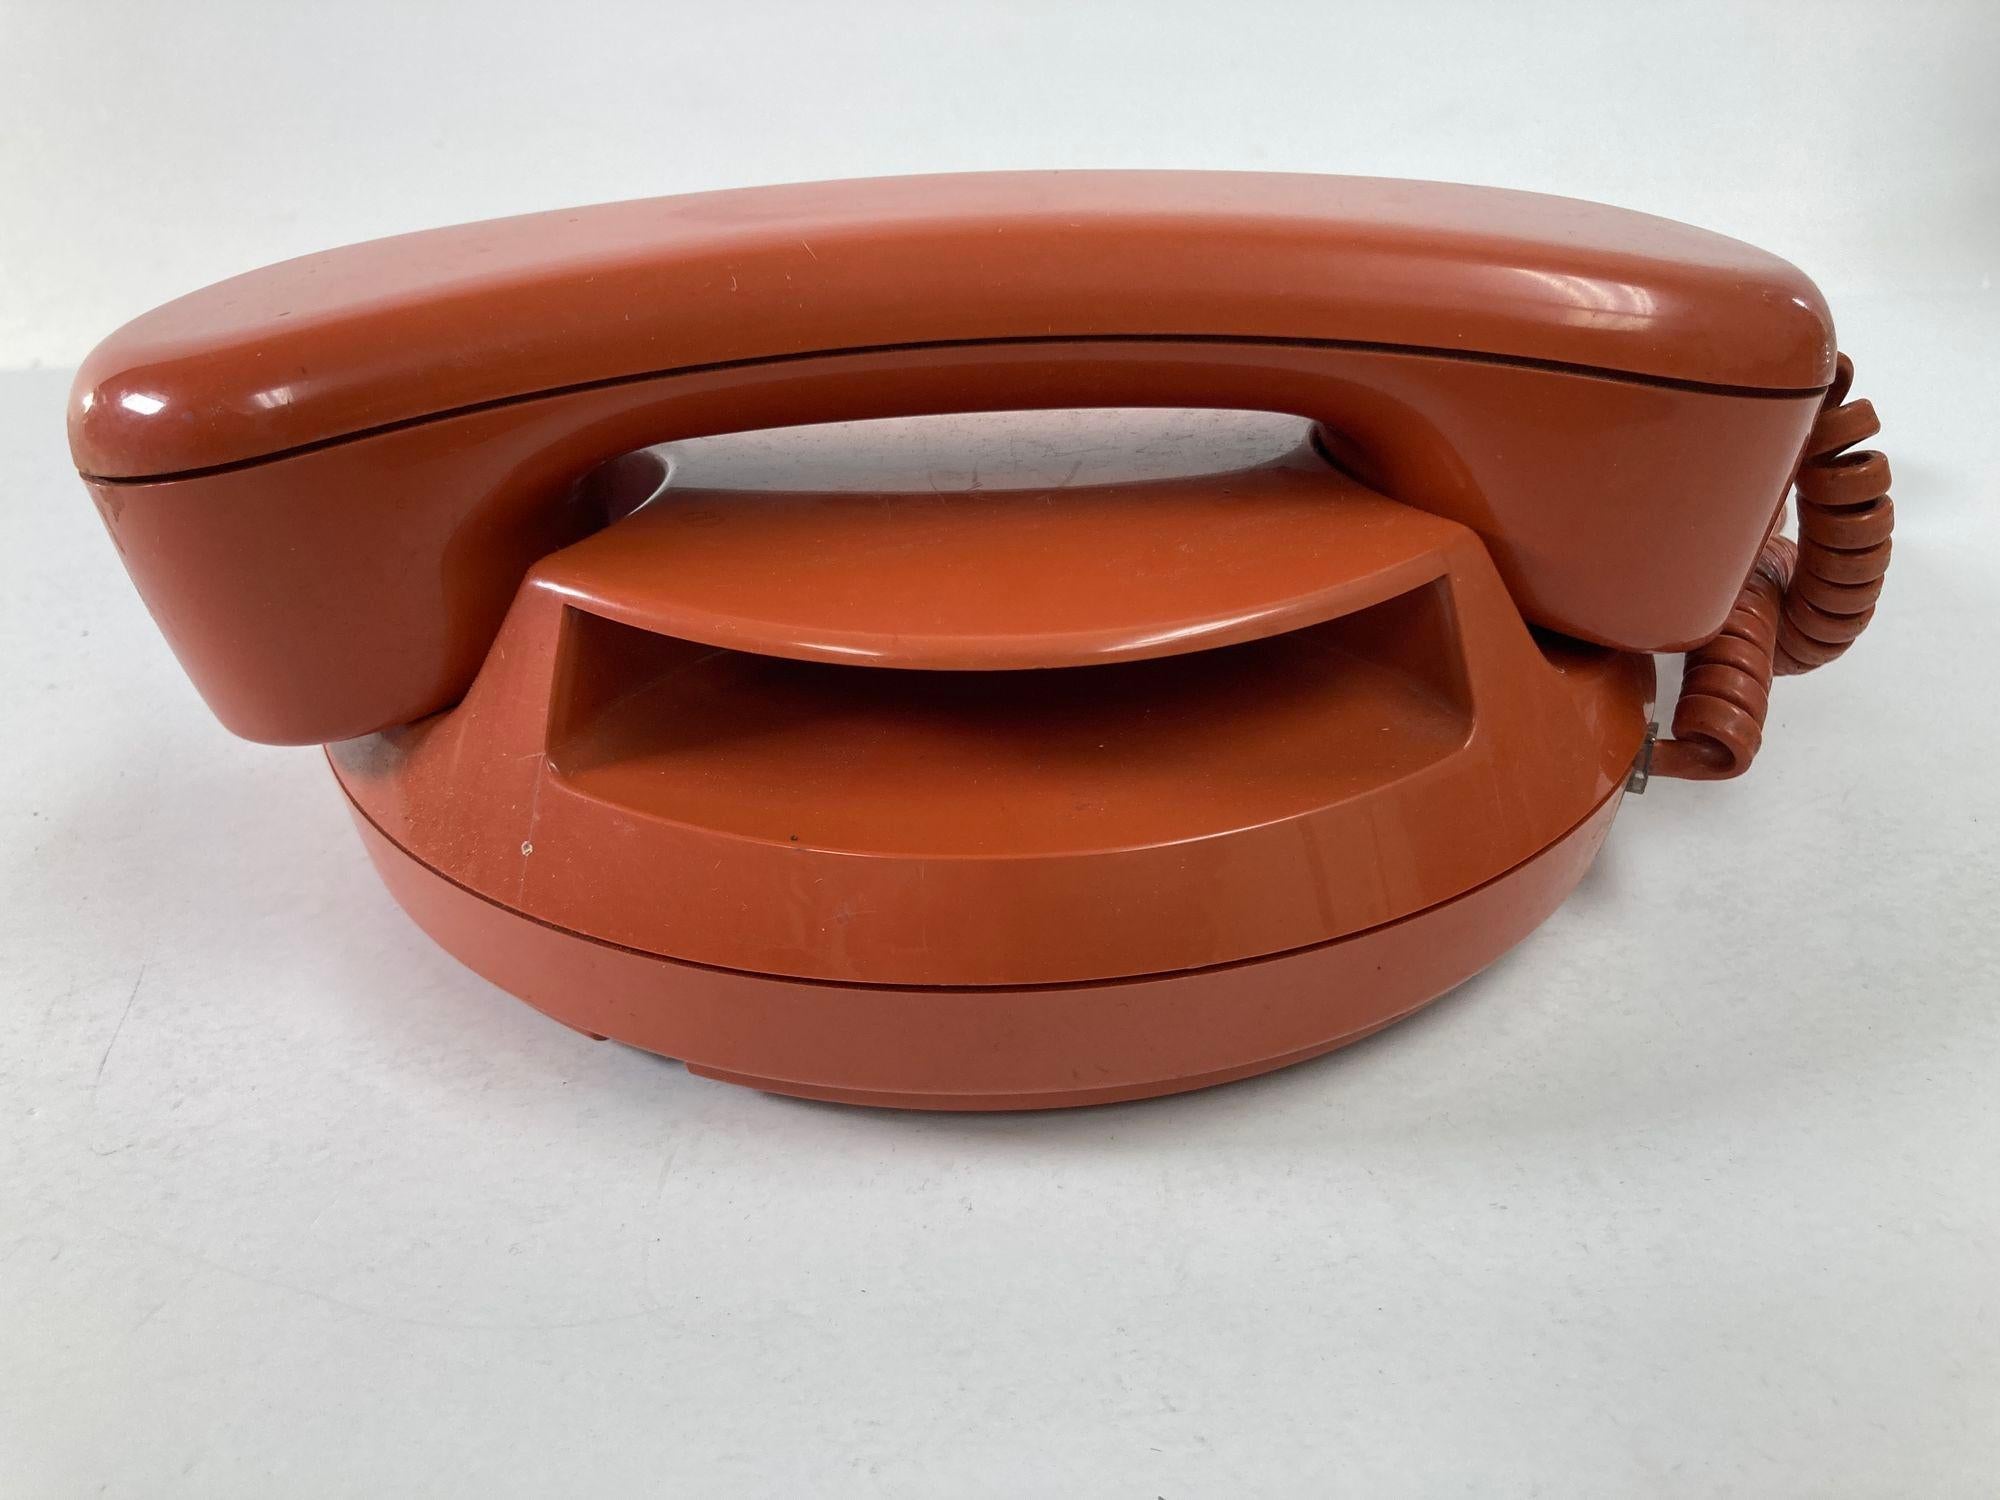 Post-Modern Vintage Retro Push-Button Round Telephone Burnt Orange Color from the, 70s